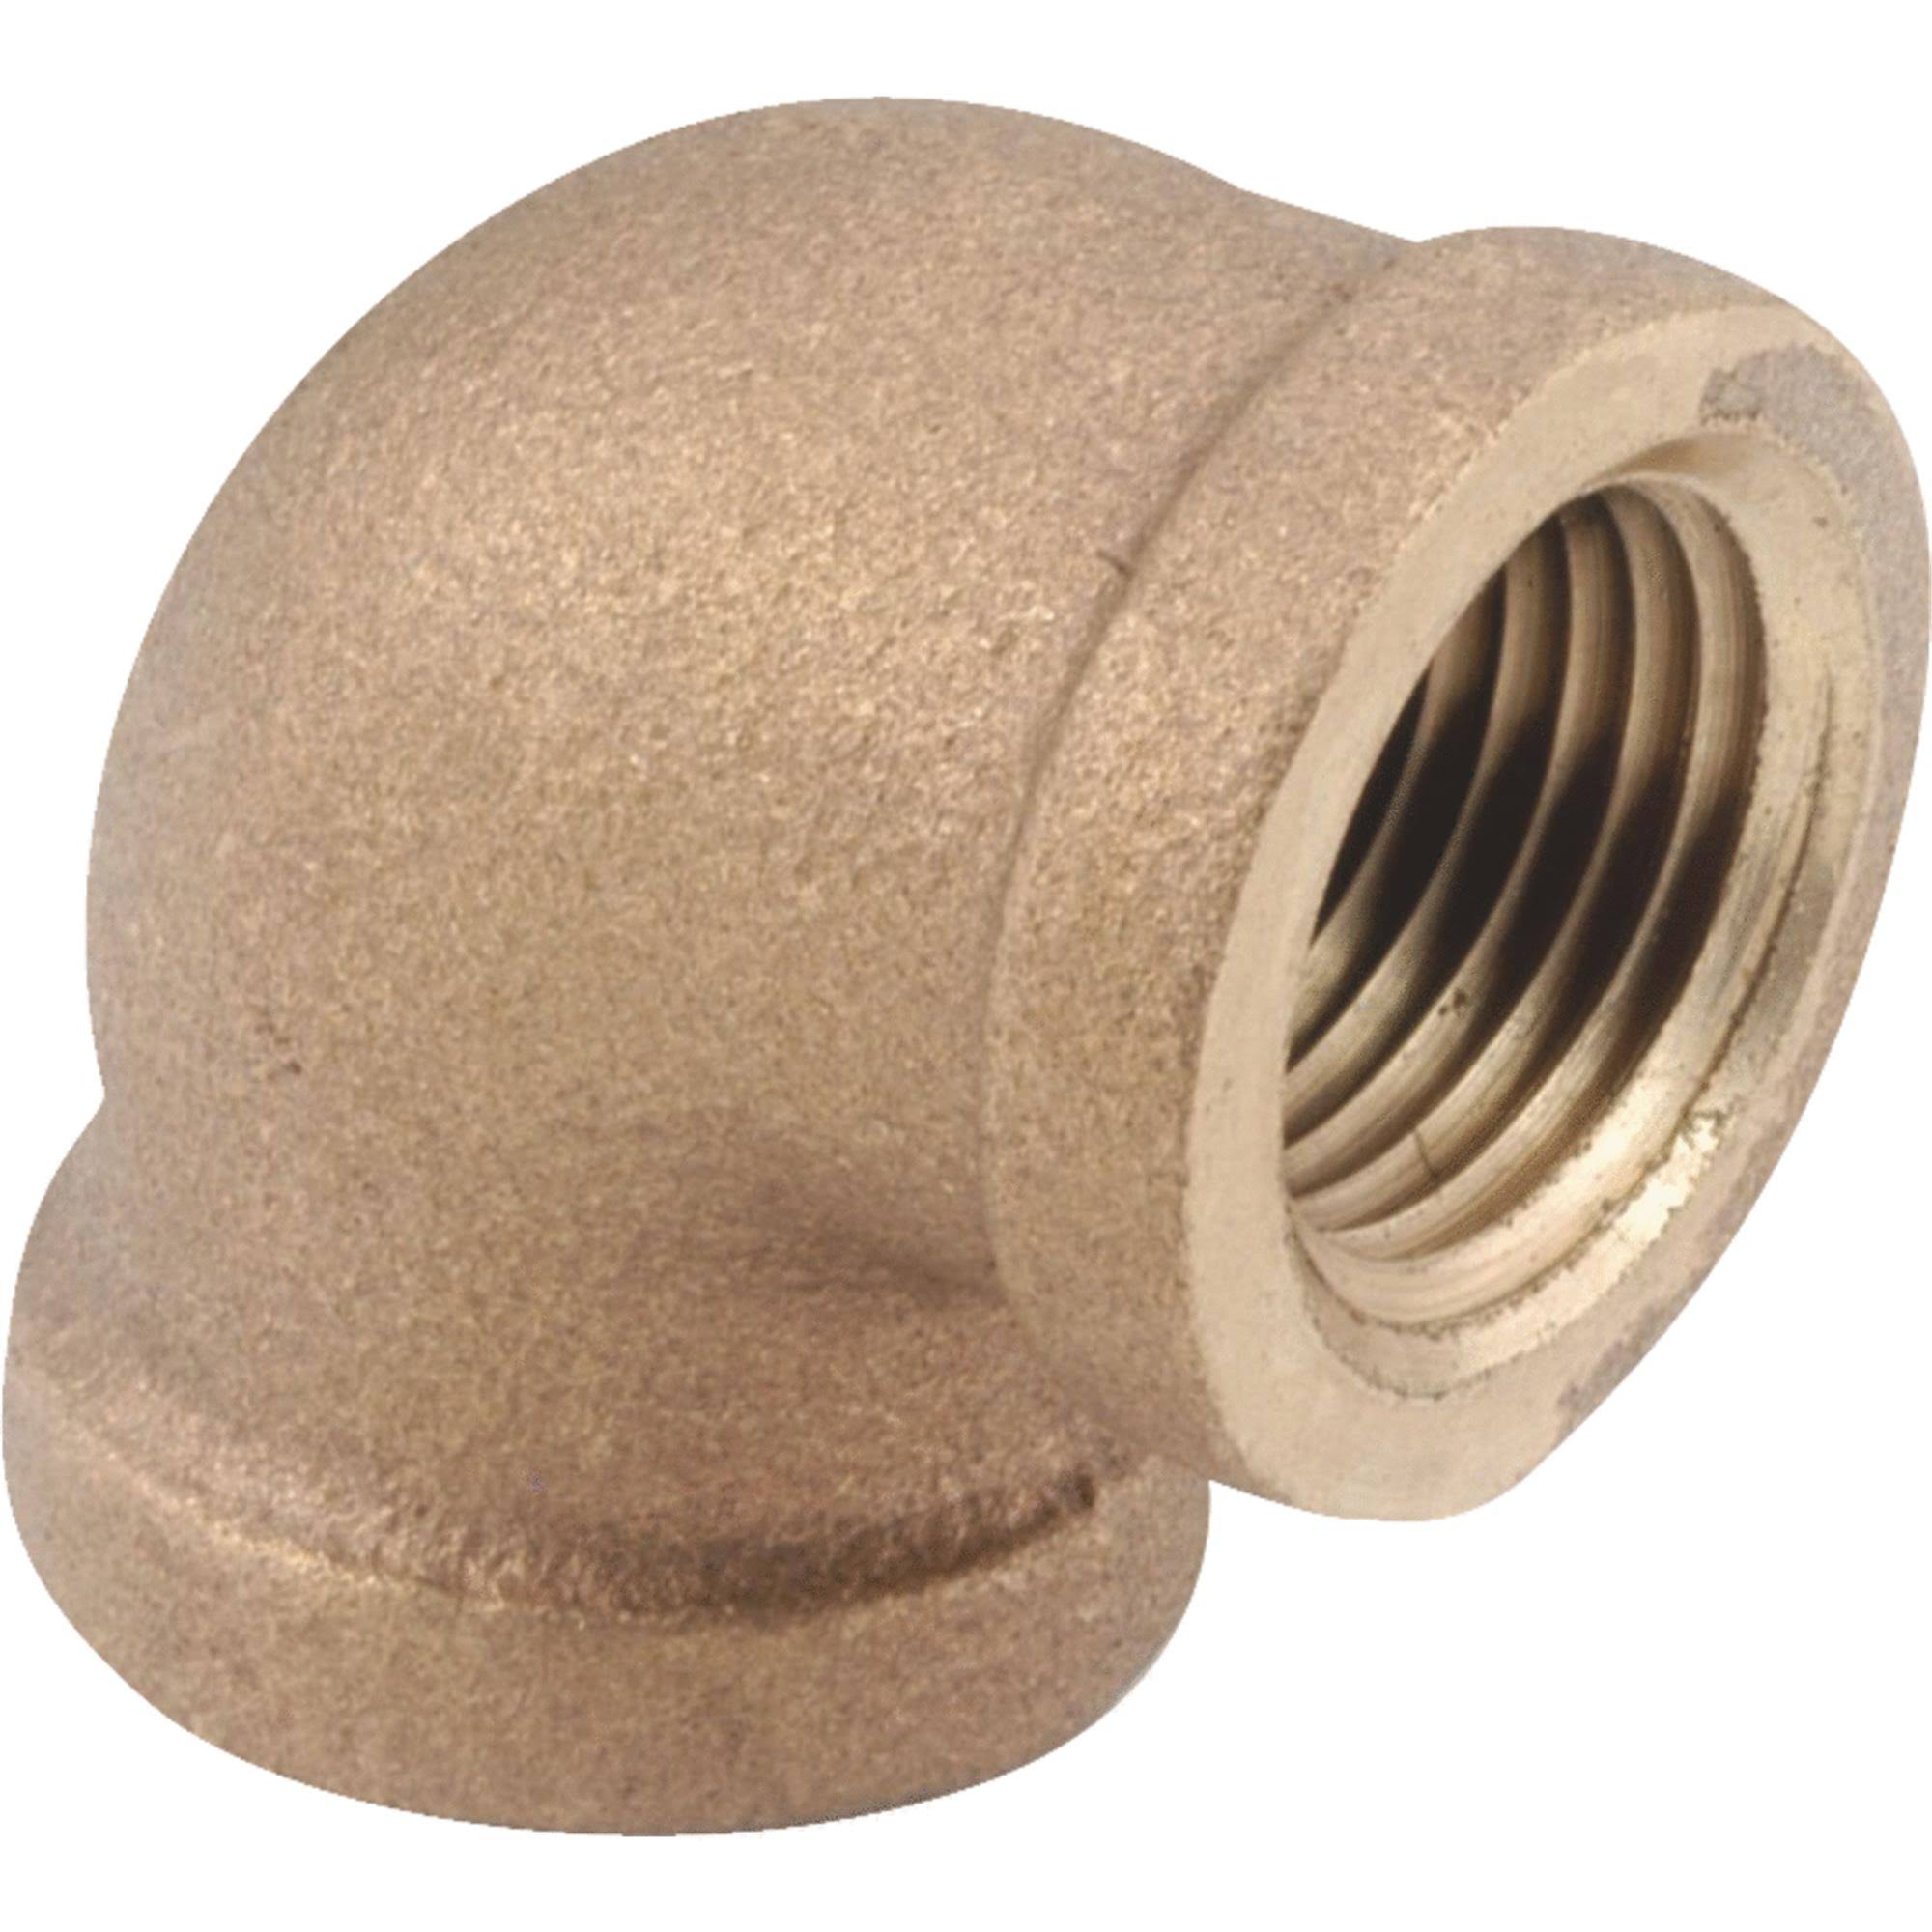 Anderson Metals Threaded Elbow - Brass, 1/4", 90 degree